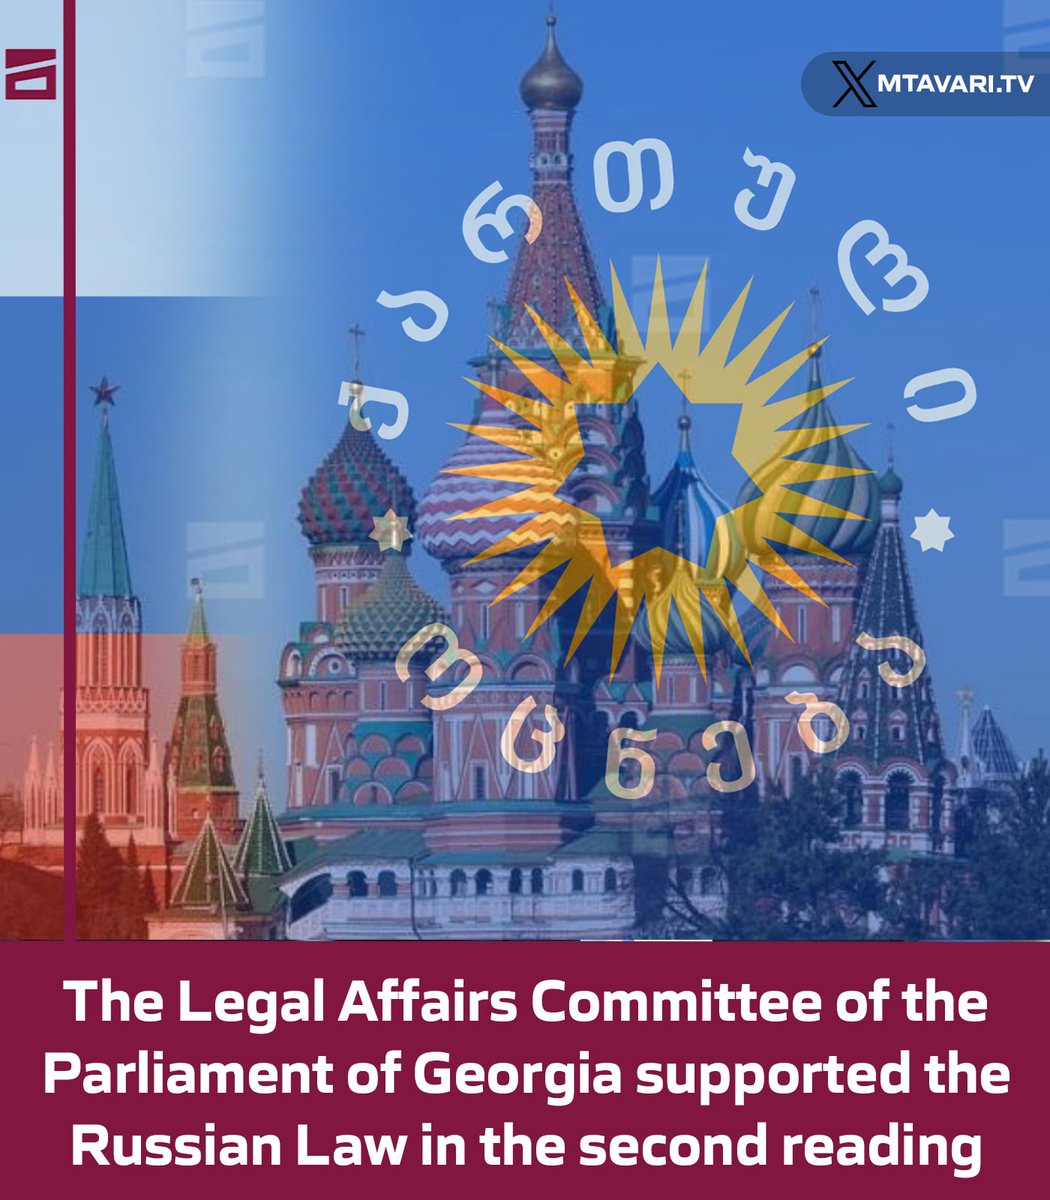 The Legal Affairs Committee of the Parliament of #Georgia supported the Russian Law in the second reading.